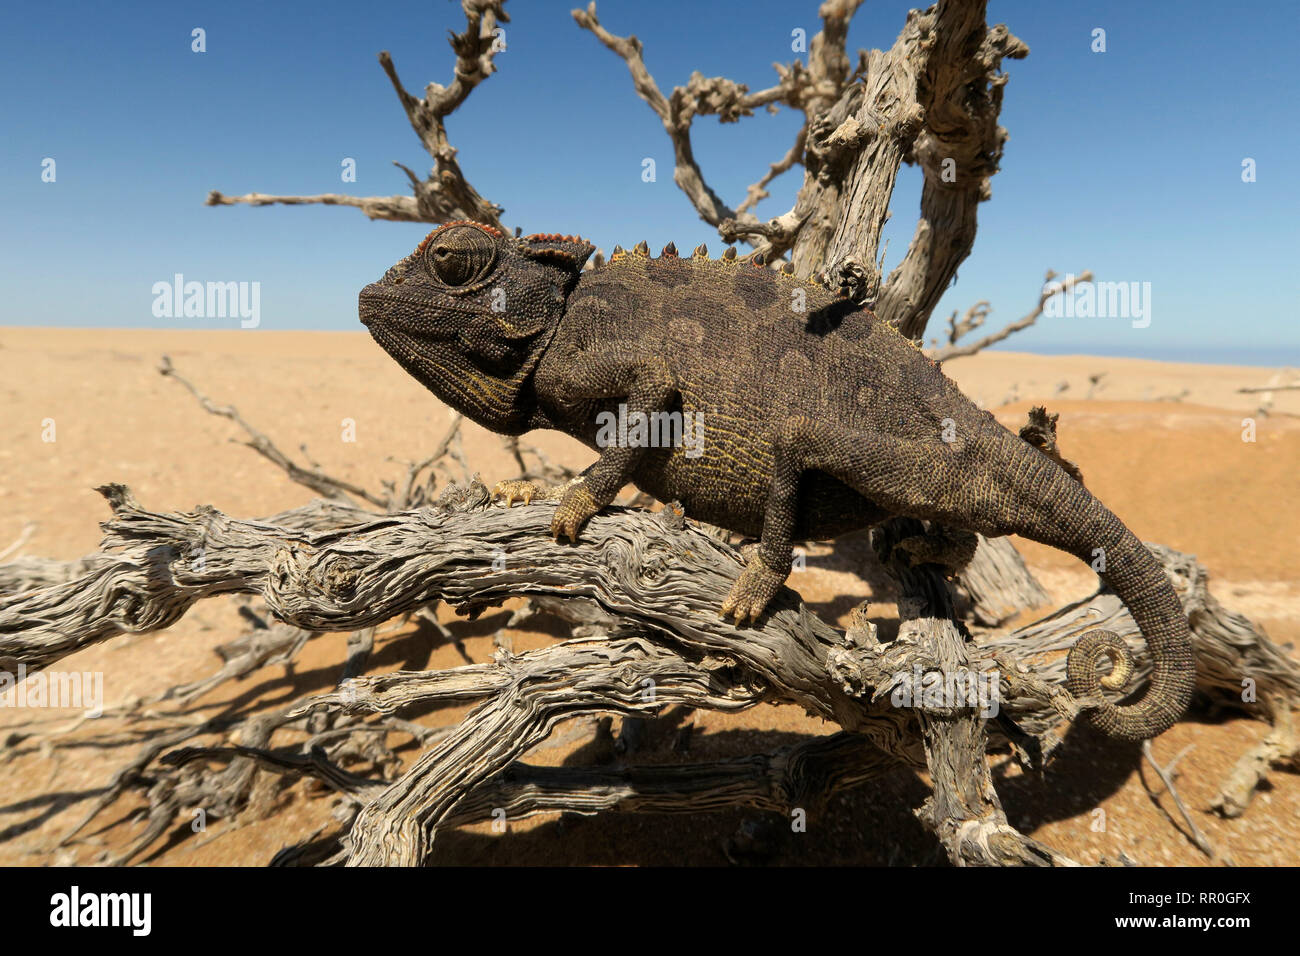 zoology, reptile (Reptilia), Namaqua chameleon or Namaqua chameleon (Chamaeleo namaquensis), Namib Des, Additional-Rights-Clearance-Info-Not-Available Stock Photo